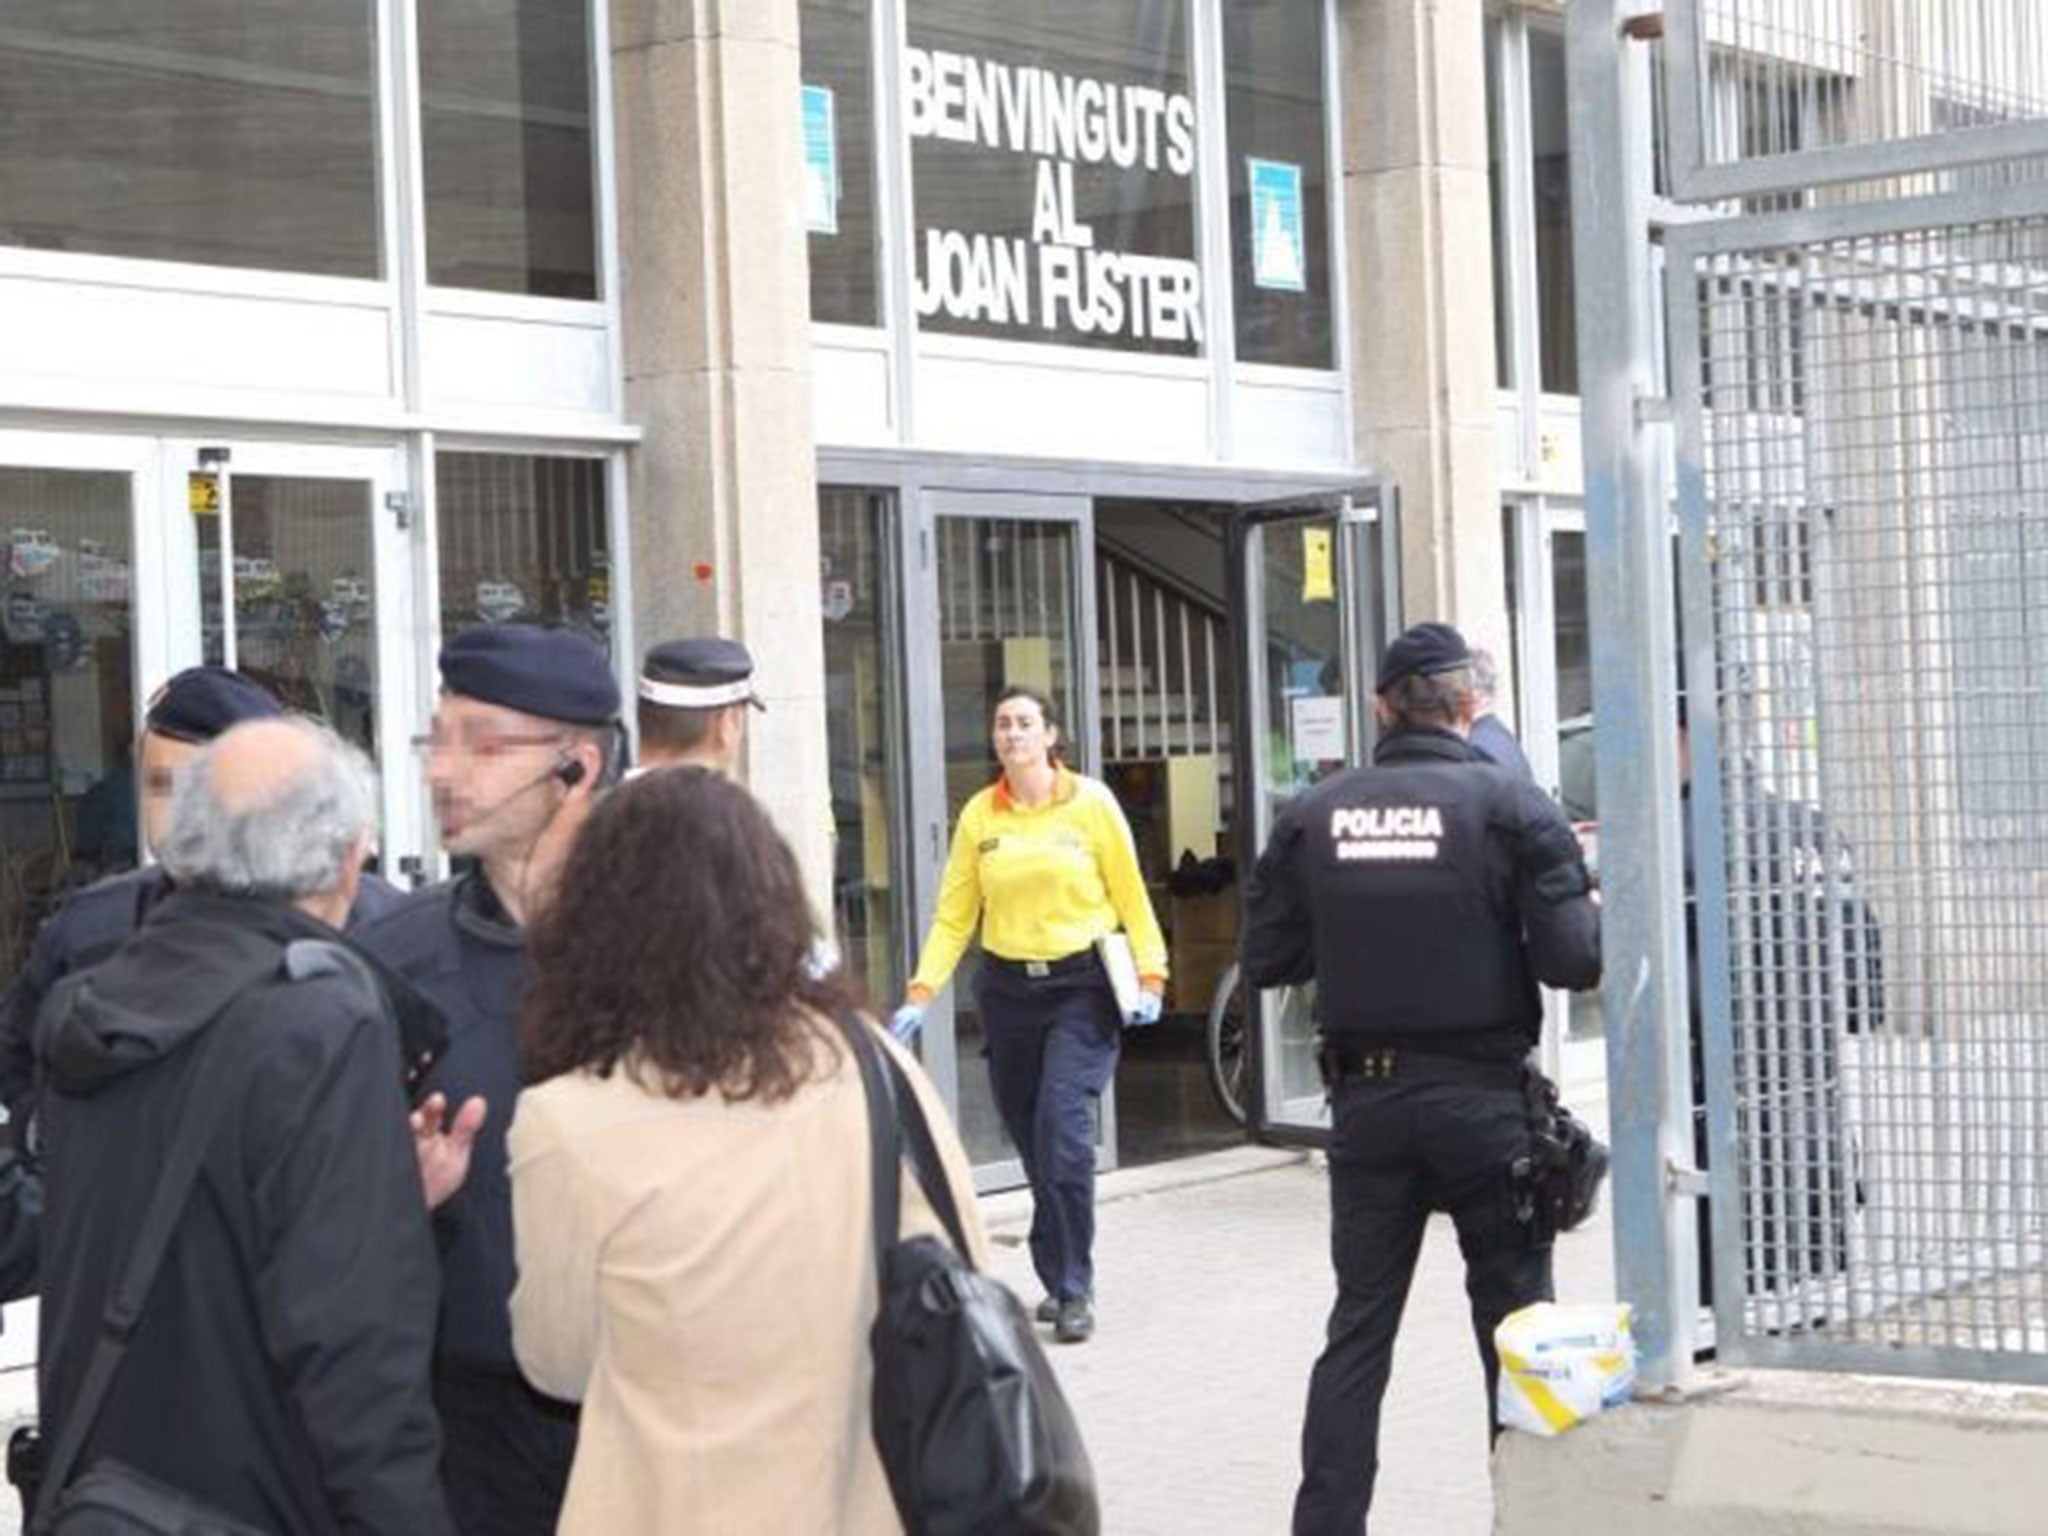 Police outside the Instituto Joan Fuster school after a student burst in with a knife and crossbow in Barcelona, 20 April 2015